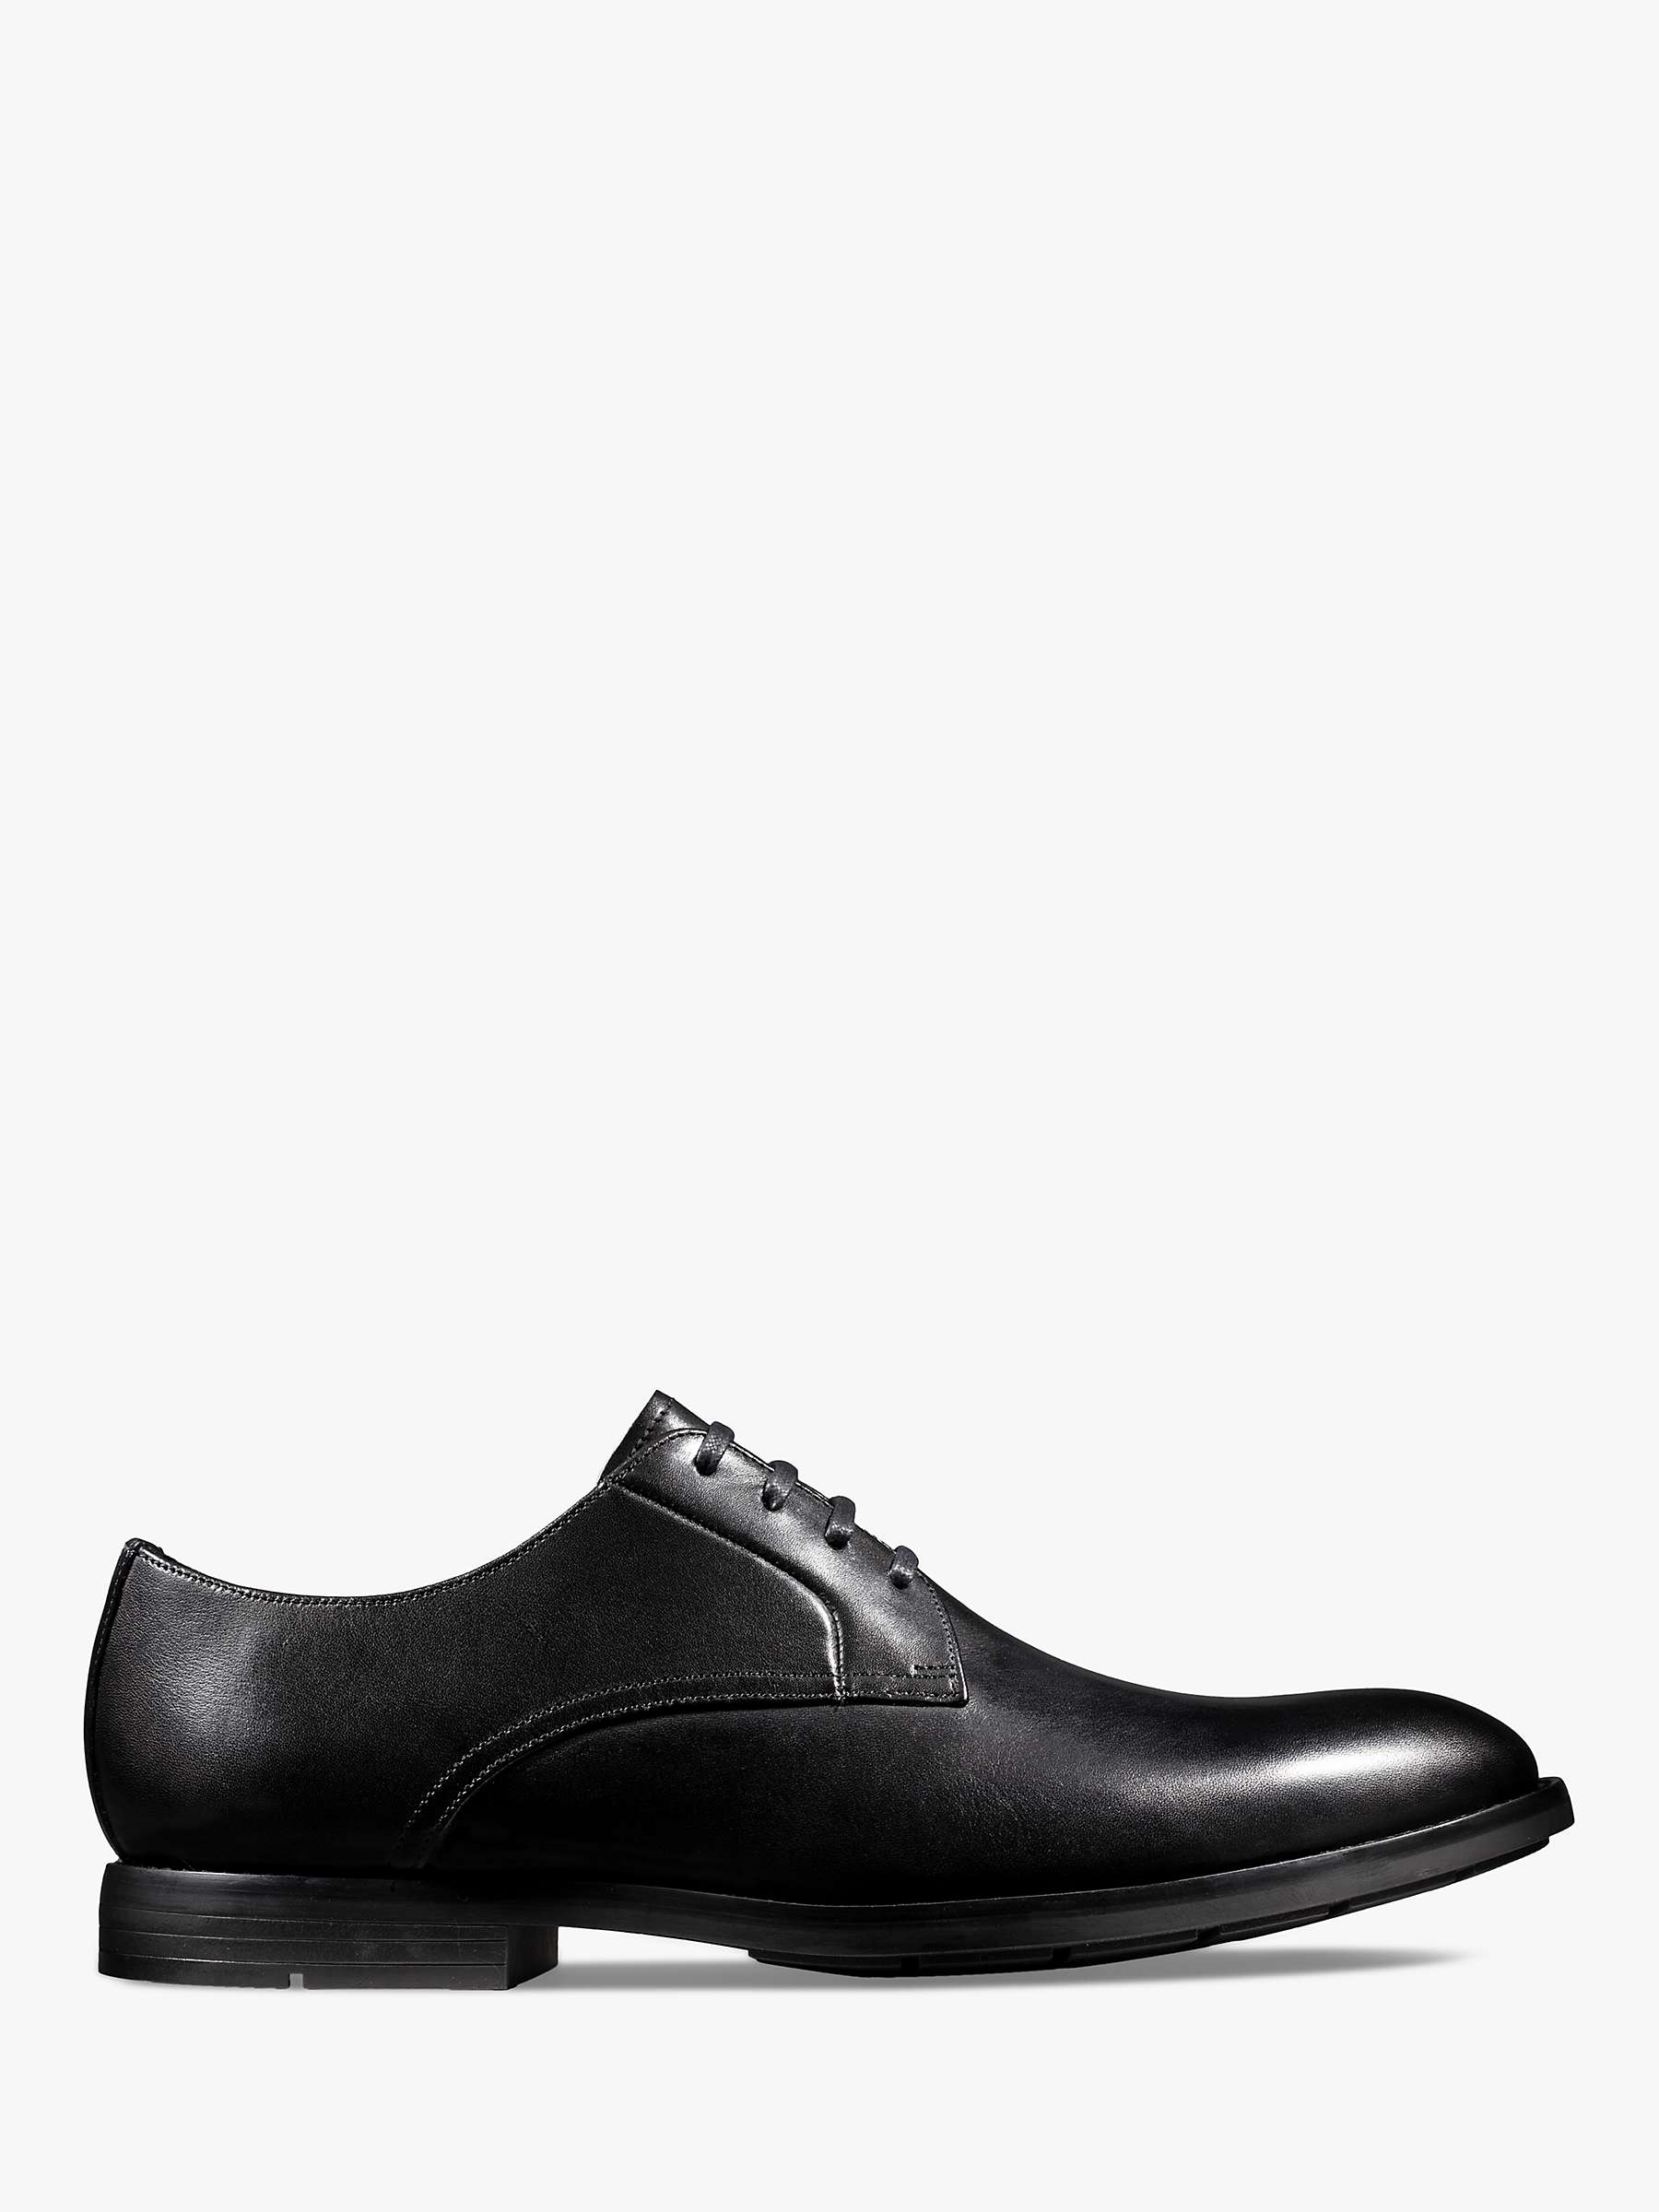 Buy Clarks Ronnie Walk Leather Derby Shoes Online at johnlewis.com